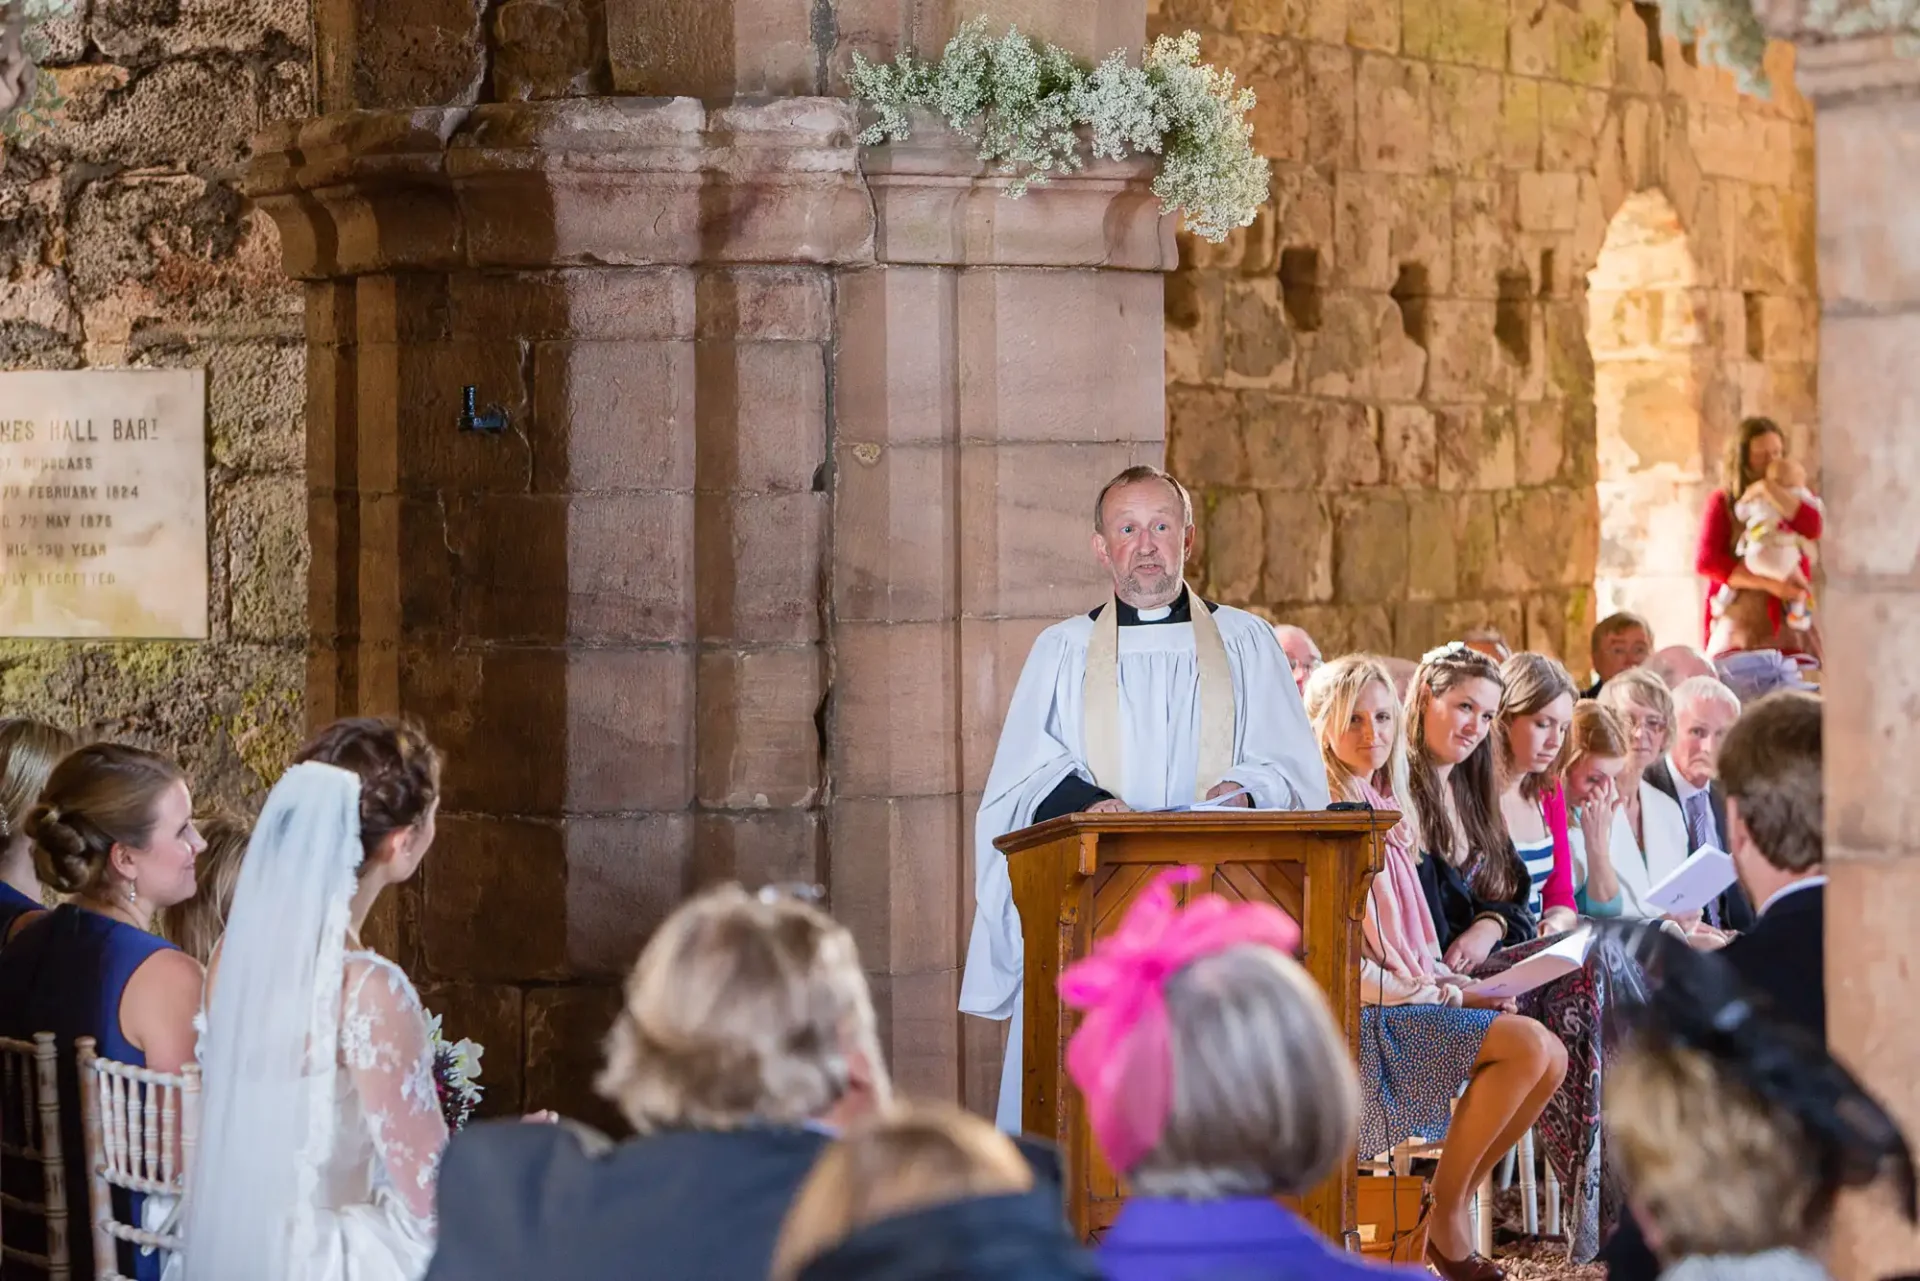 Priest speaking at a lectern during a wedding ceremony in a historic stone church, with guests seated and a bride listening attentively.